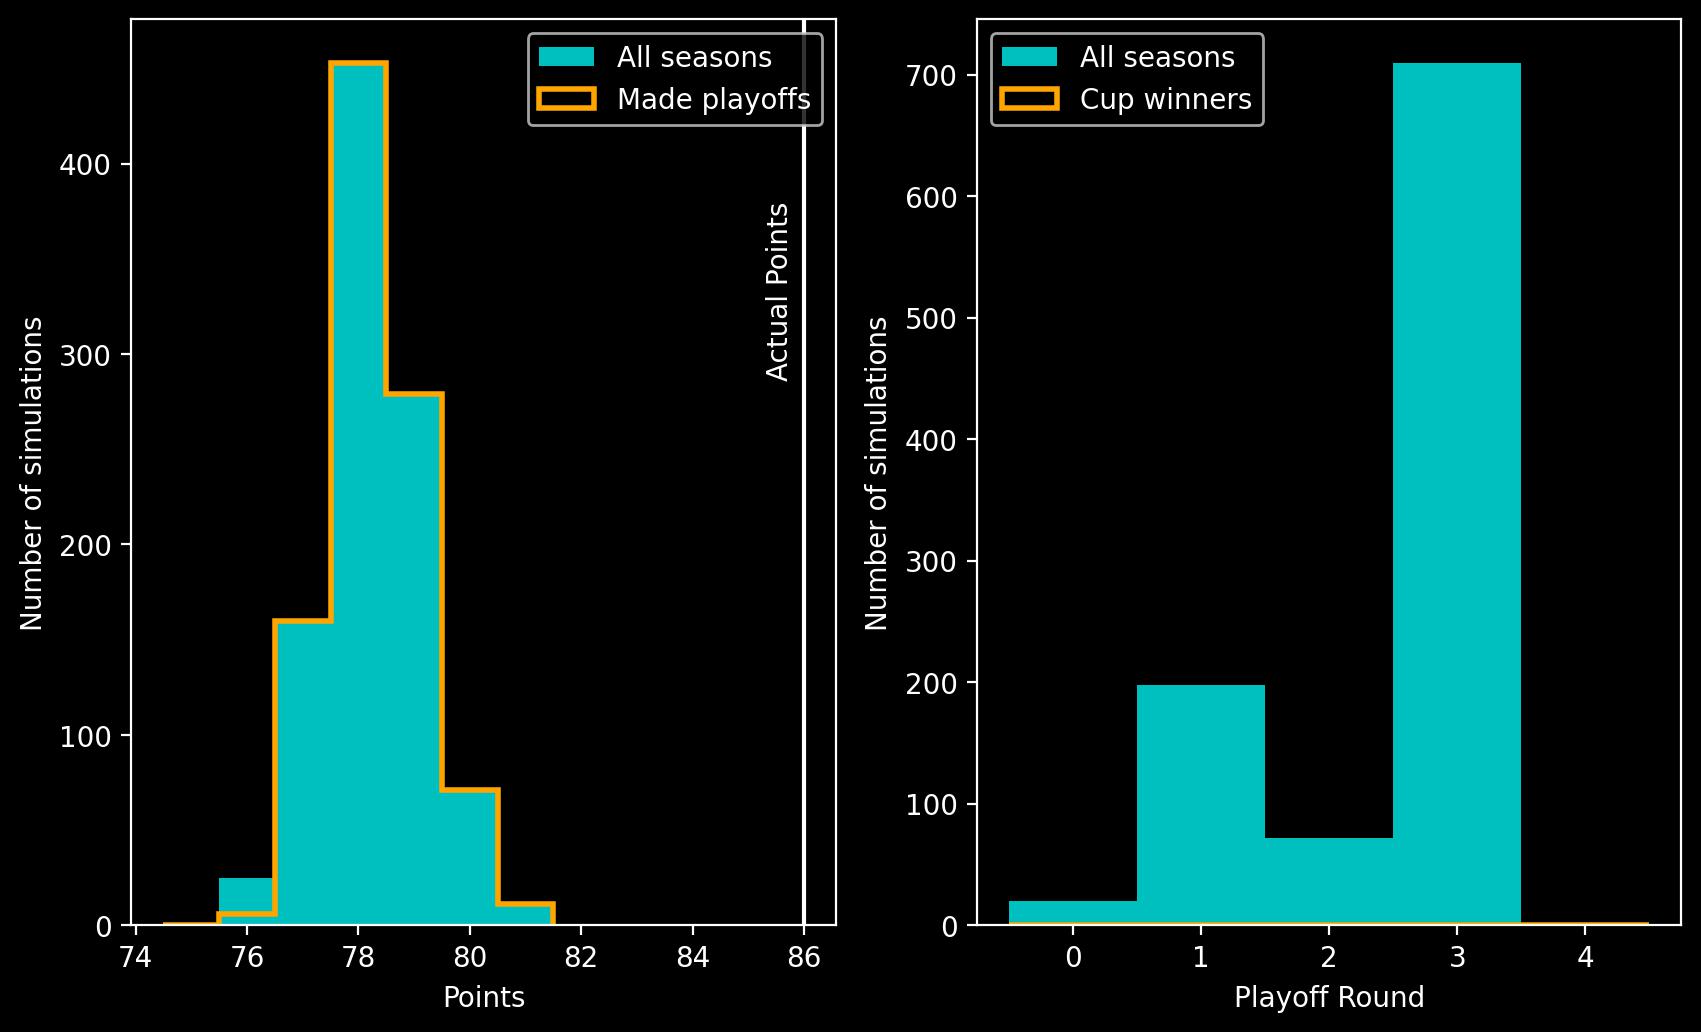 Two panel plot showing histograms. Left panel shows a histogram of points on the x-axis against number of simulations on the y-axis, the peak is at 78 points. Right panel shows playoff round on the x-axis against number of simulations on the y-axis. The largest bar is at playoff round 3.